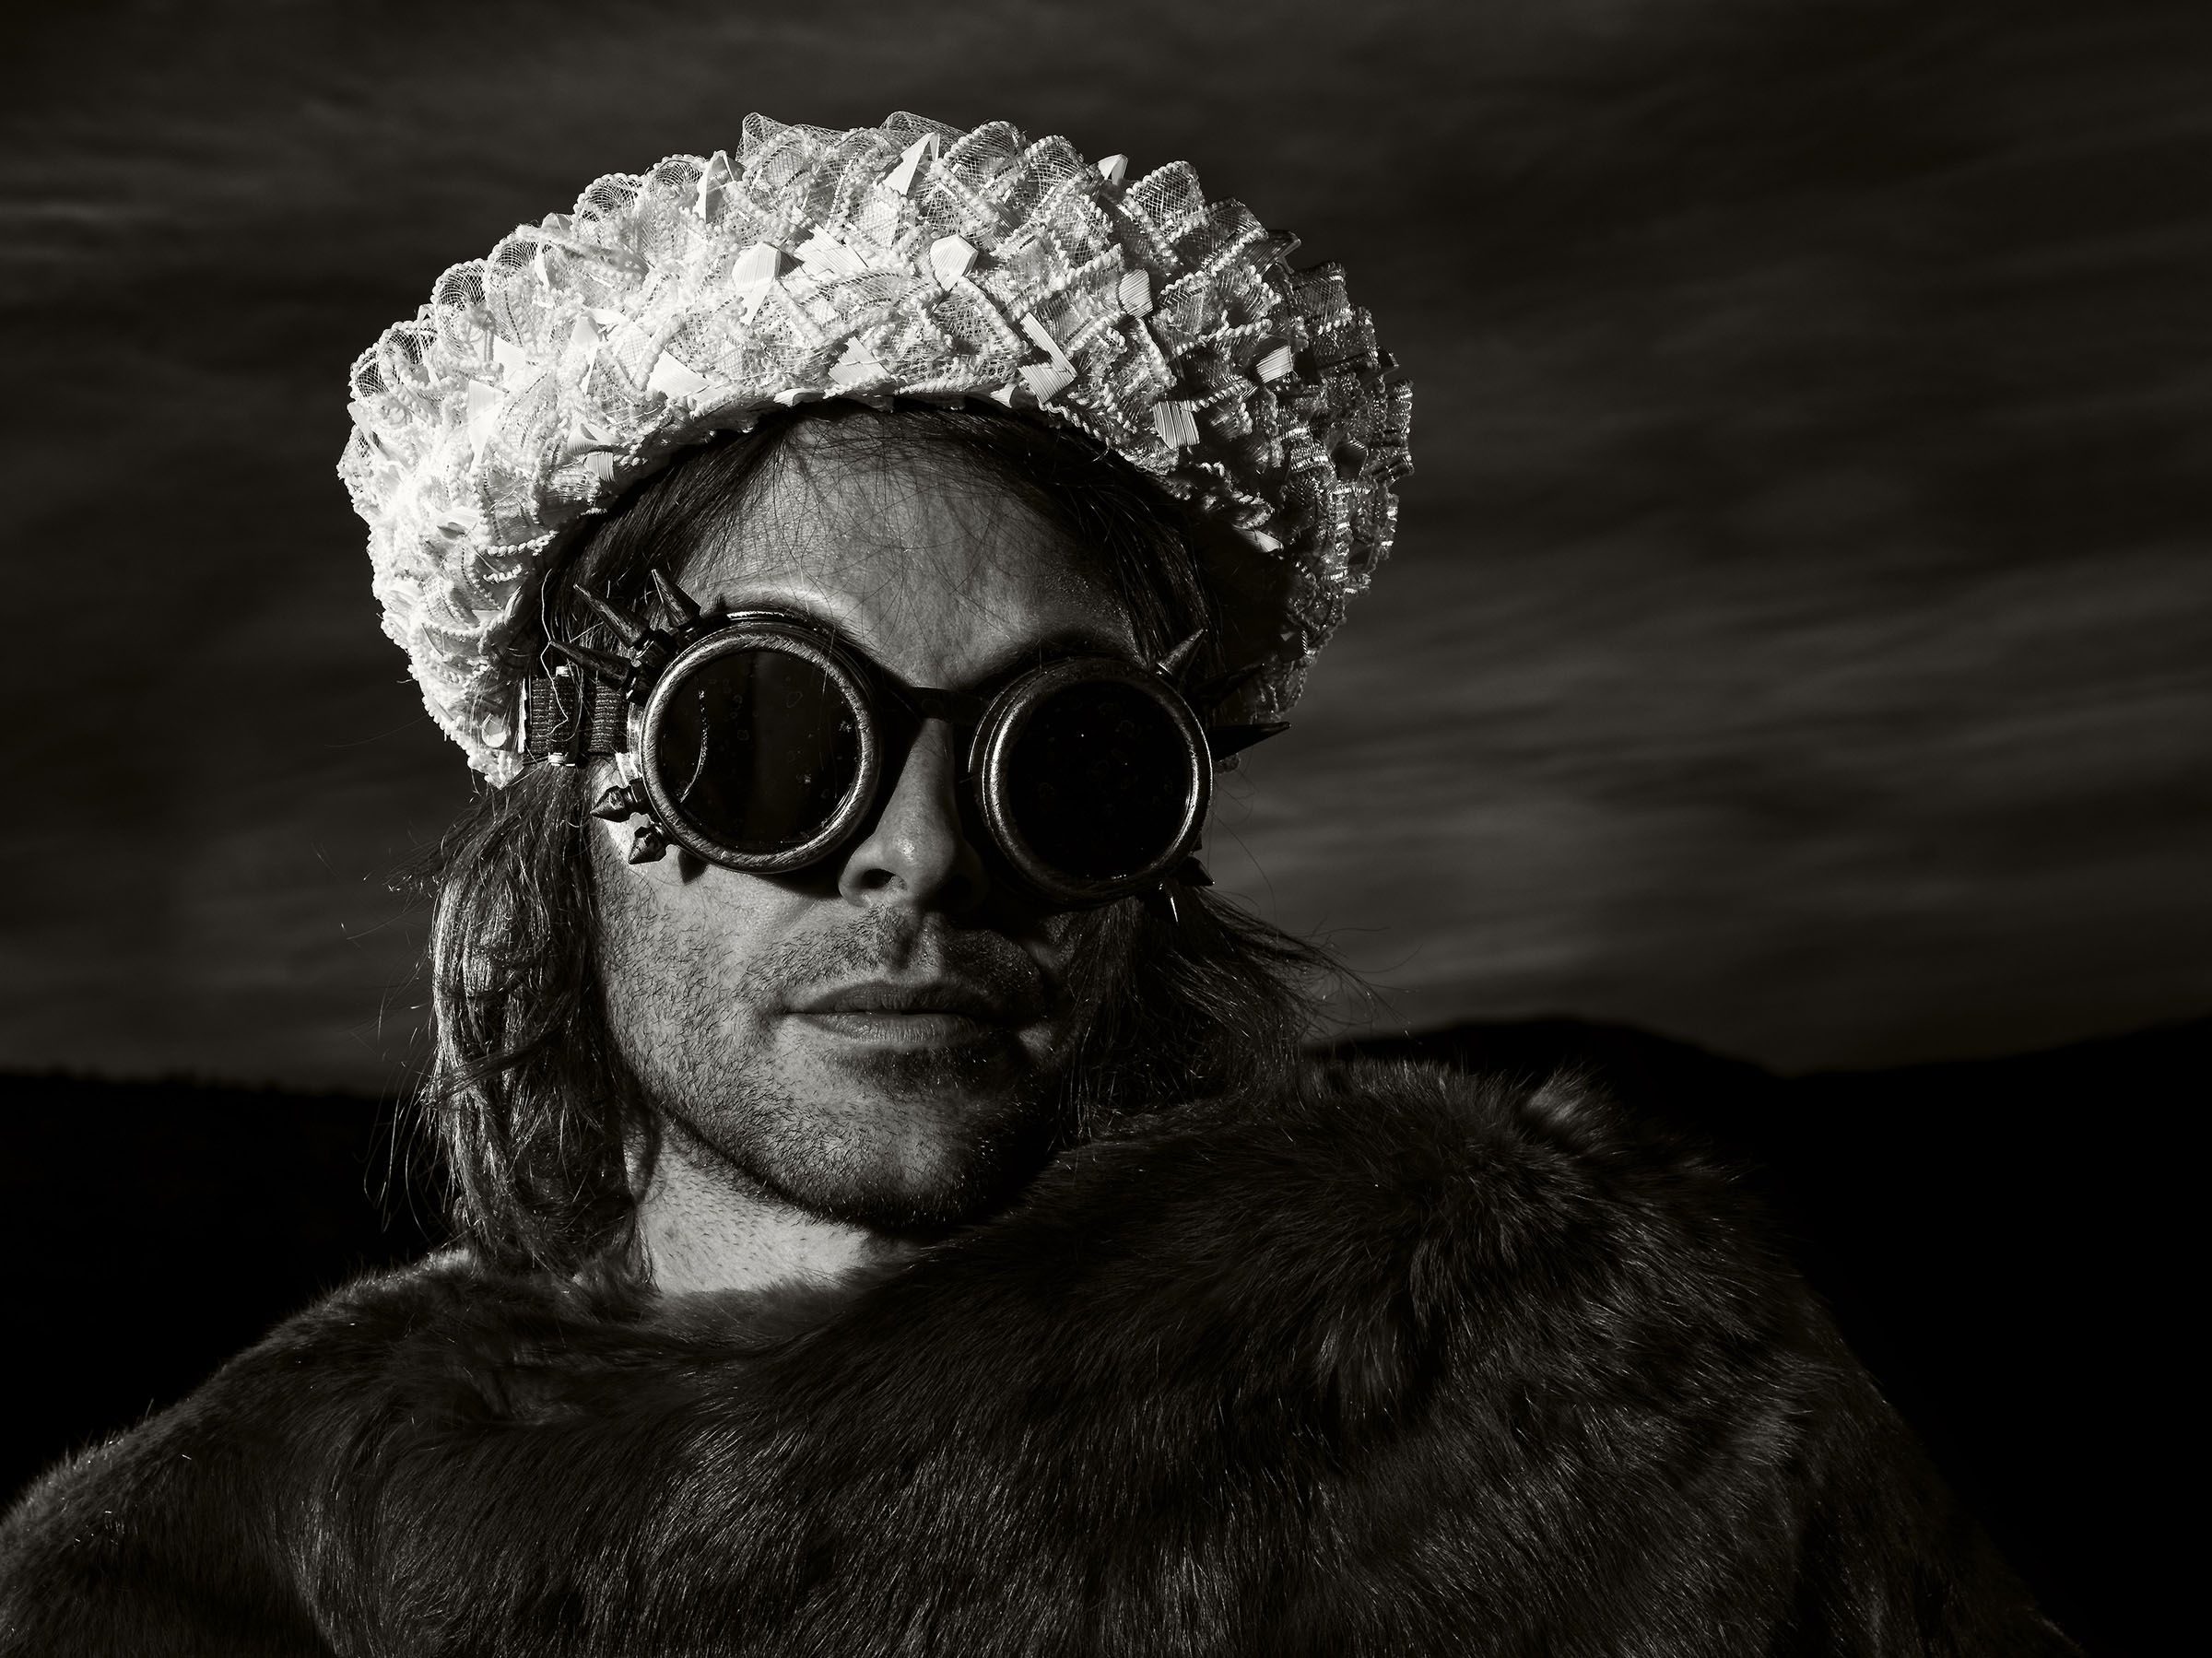 Desert Prince, Lives Outside Vegas, Eats Tourists at Night, NYC editorial Portrait Photographer Wick Beavers 